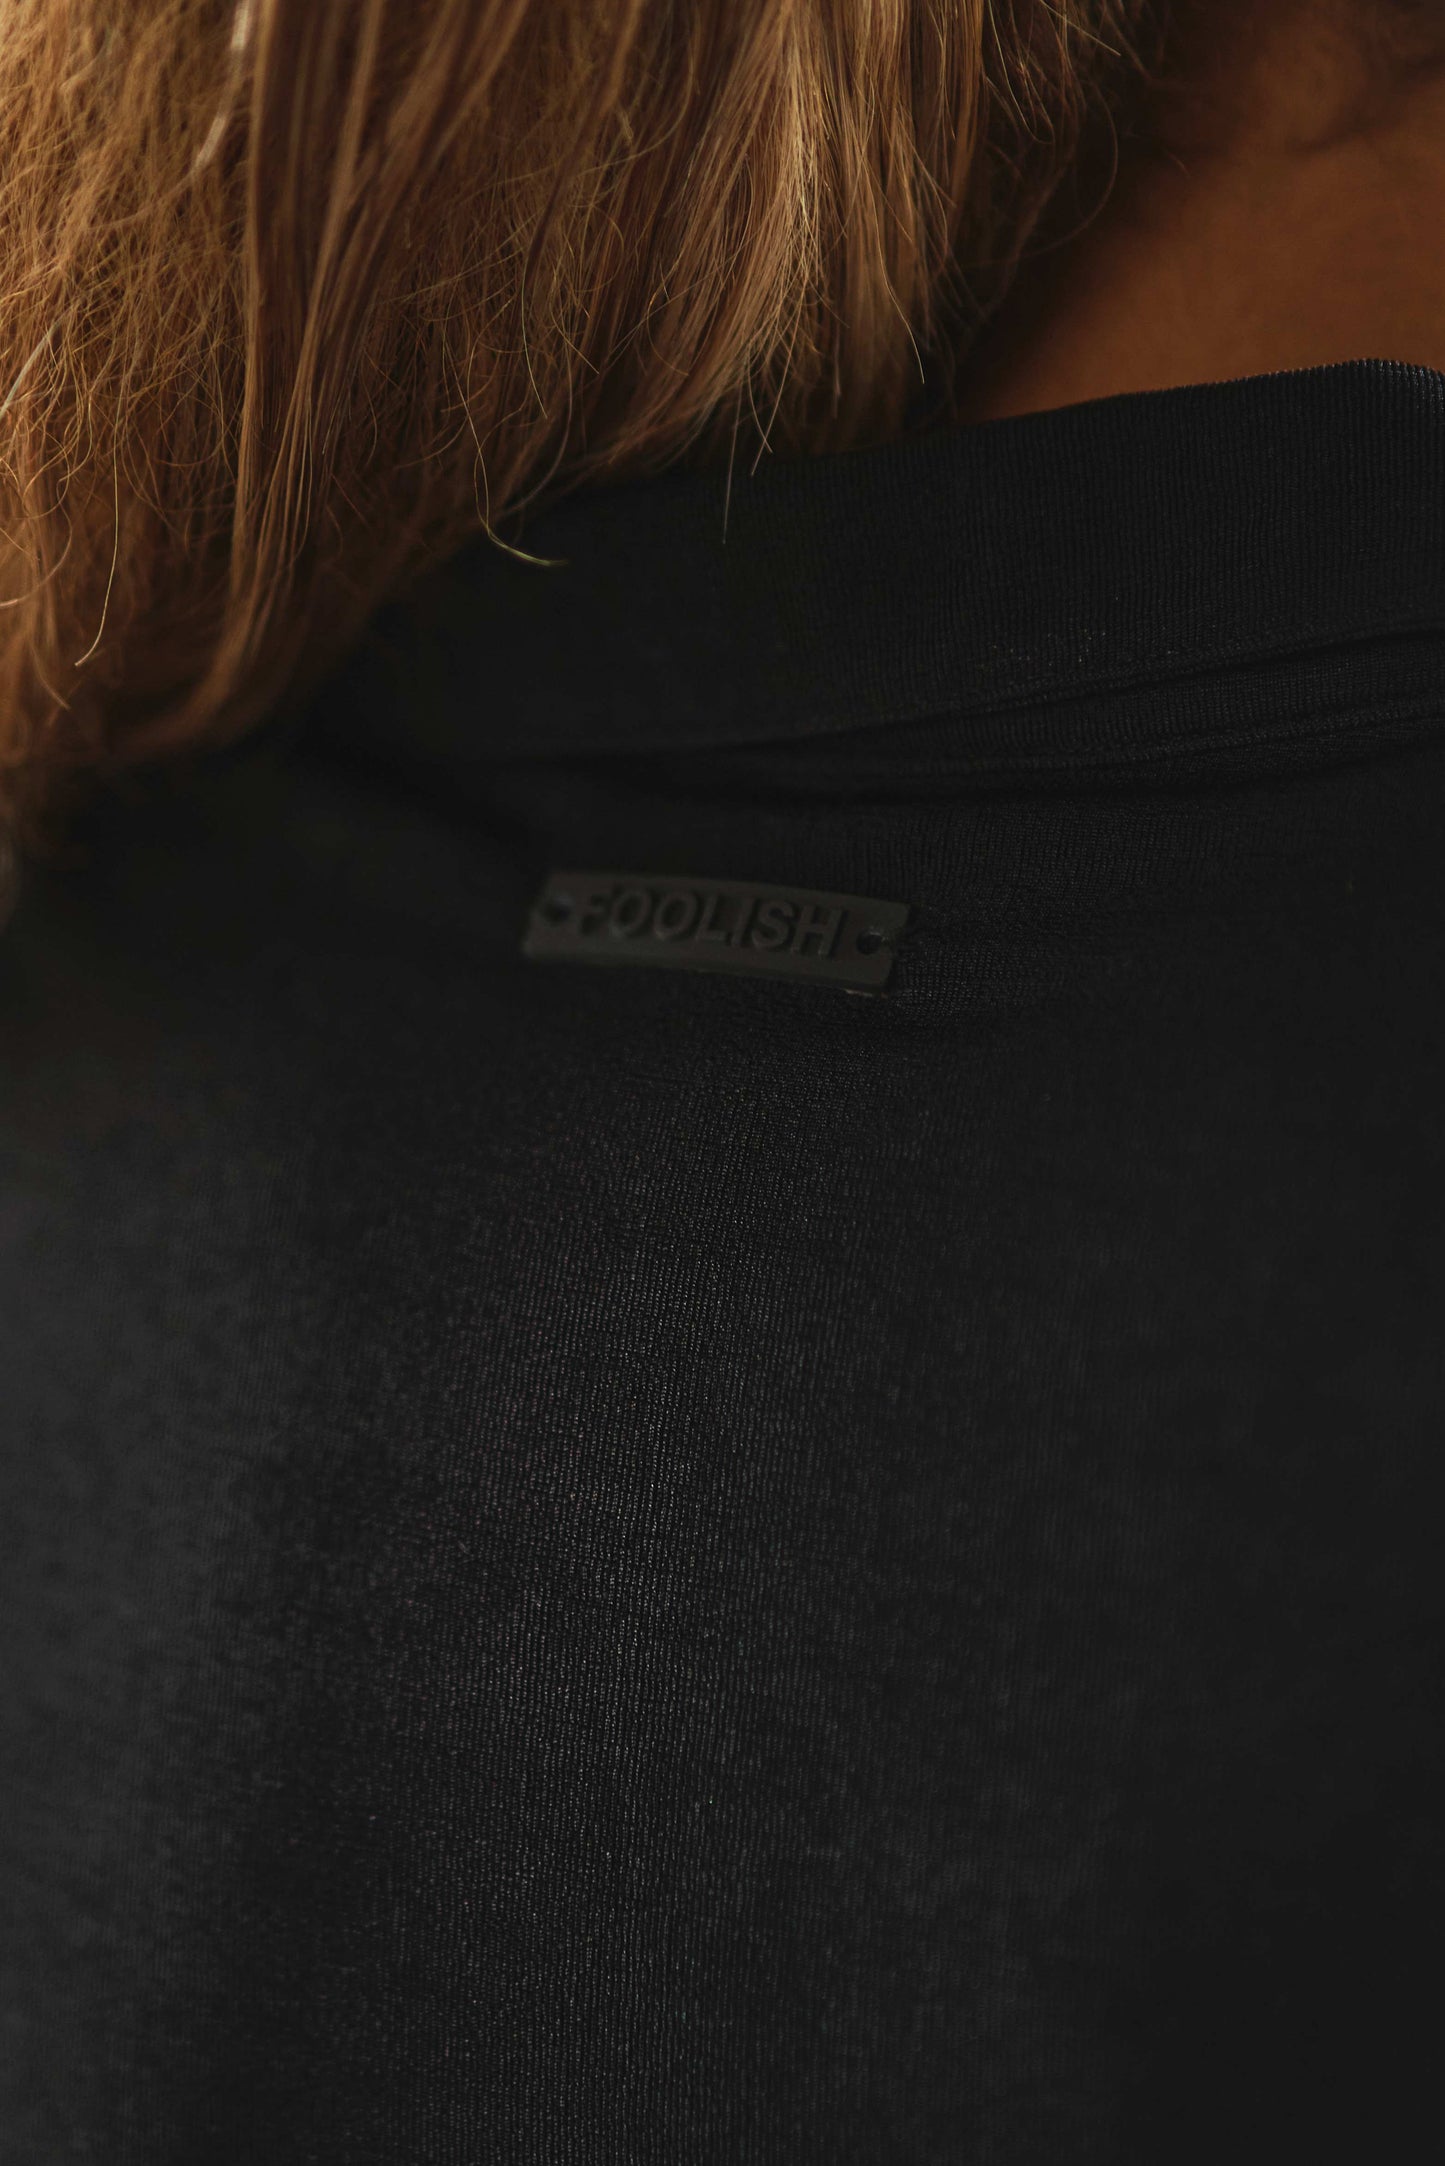 close up branded detailing on back of luxury womens dress in black